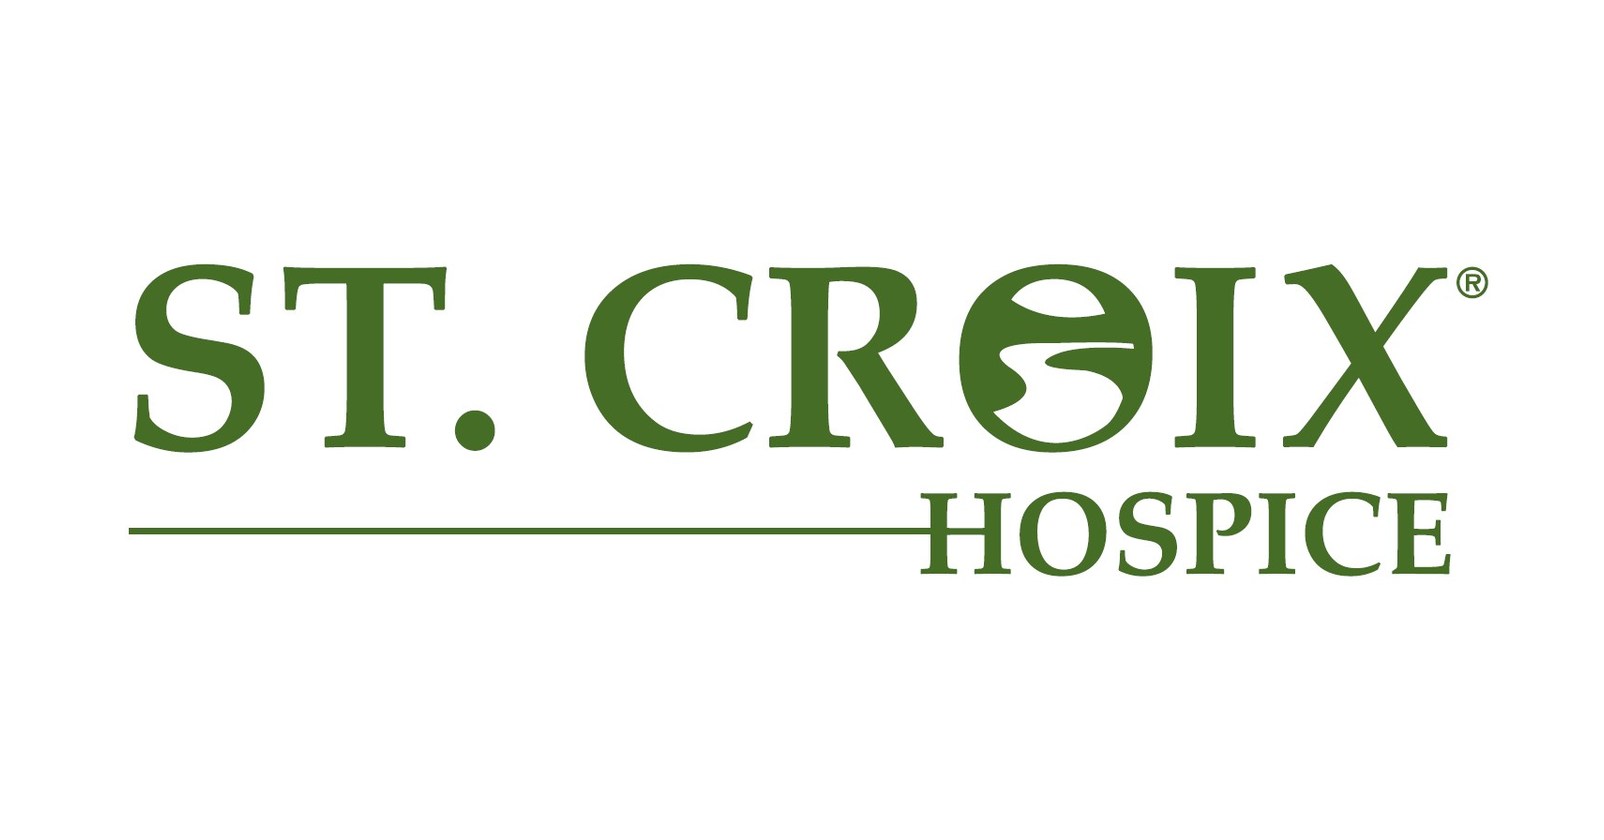 St. Croix Hospice Expands with New Branch in Overland Park, Kansas